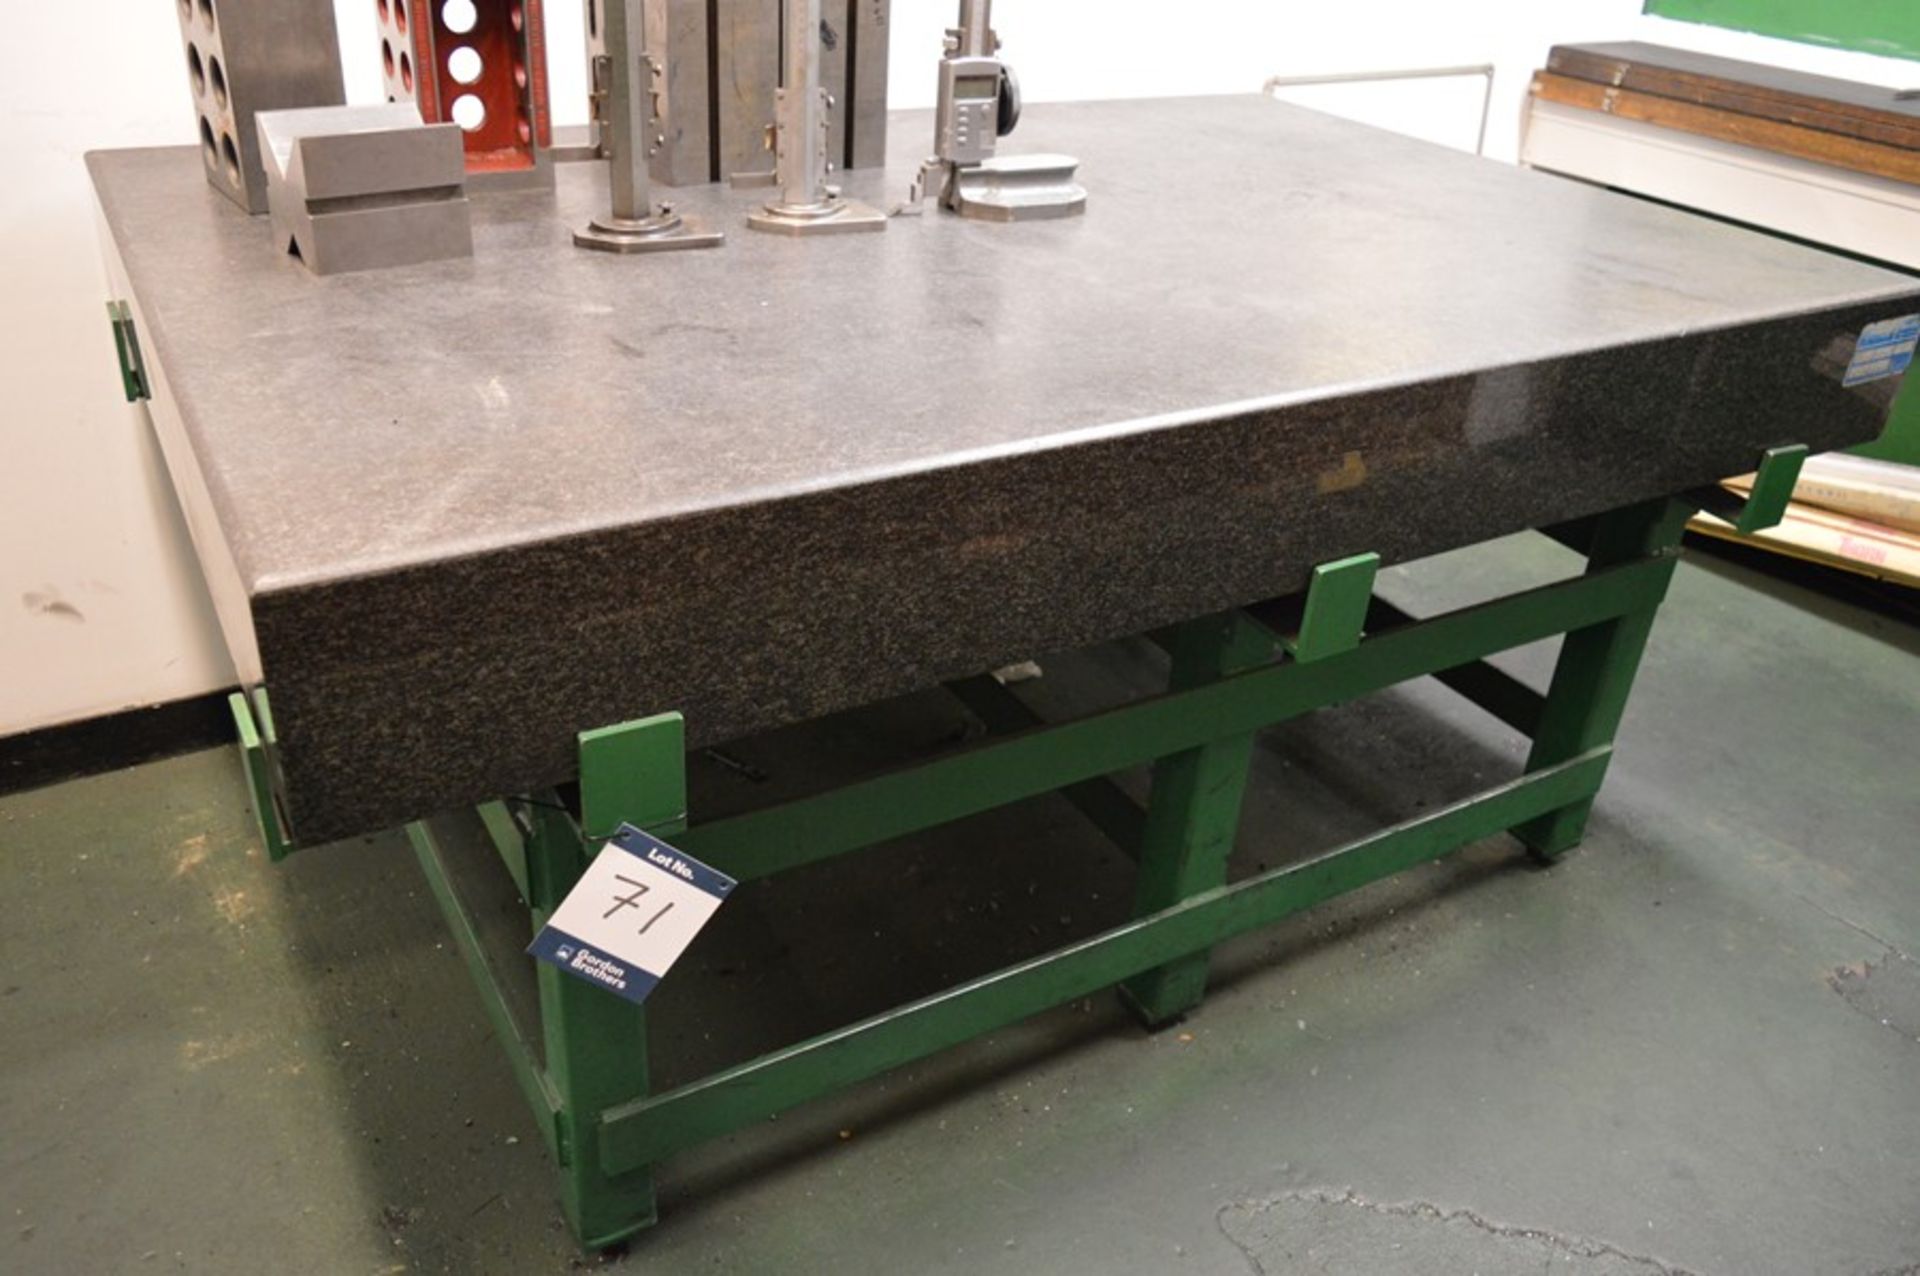 Diabase, Grade 1 granite inspection table (1987) (contents not included) Size: 1.84m x 1.22m